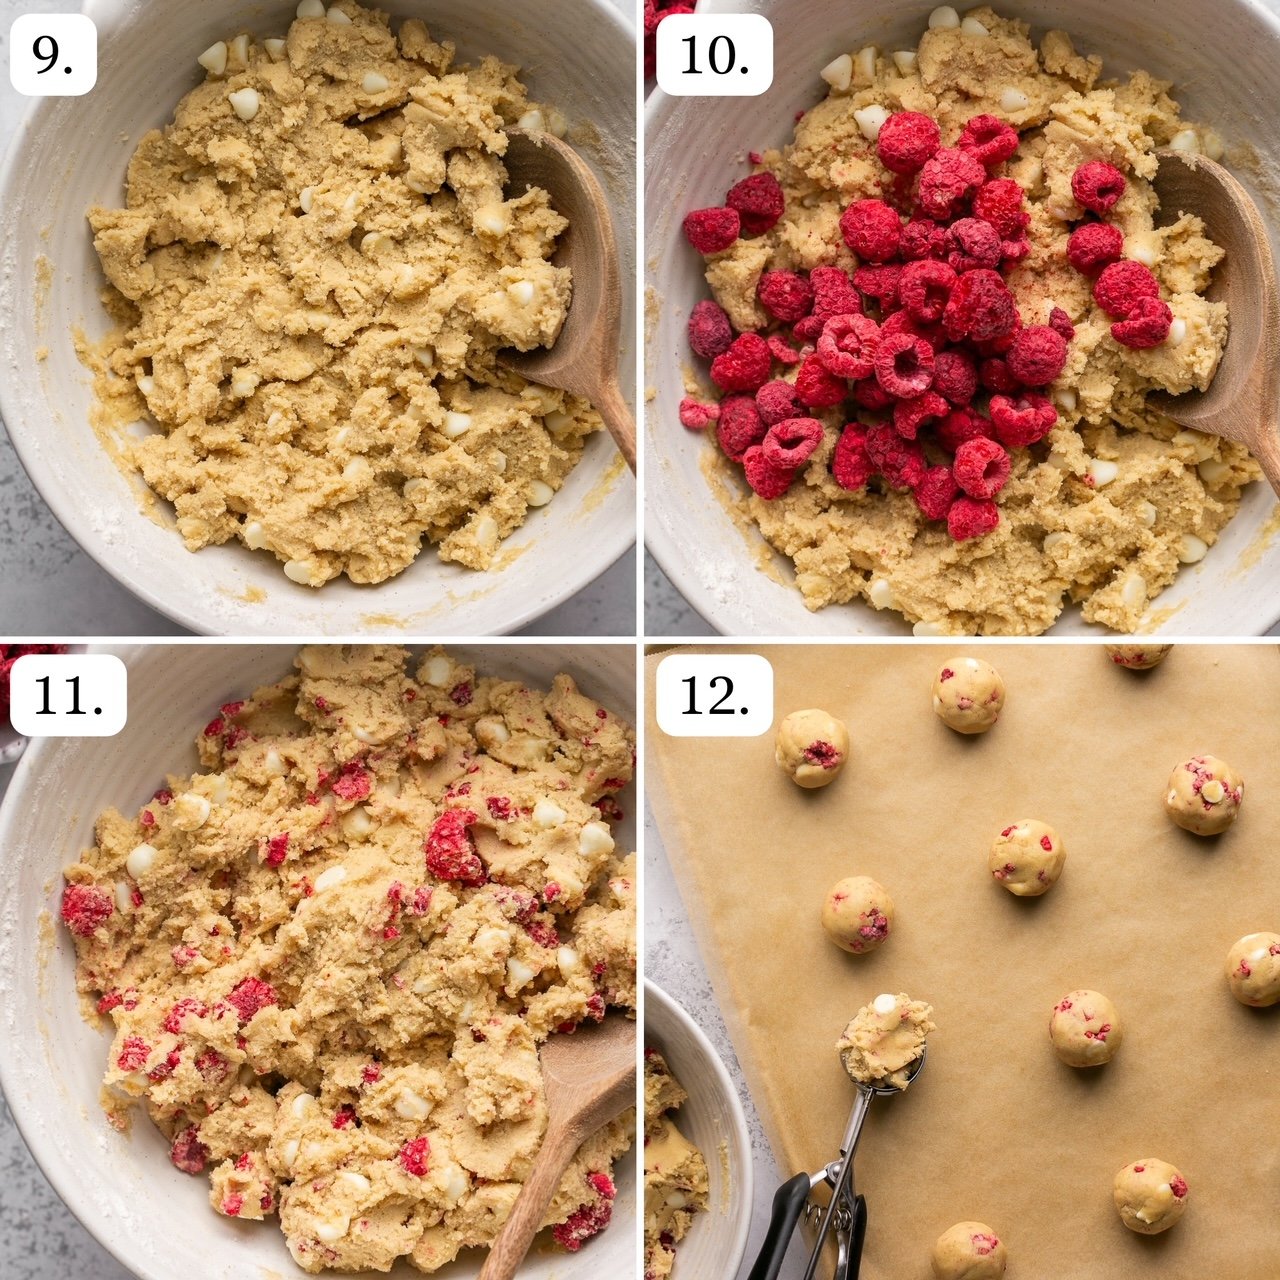 steps 9 through 12 for making white chocolate raspberry cookies